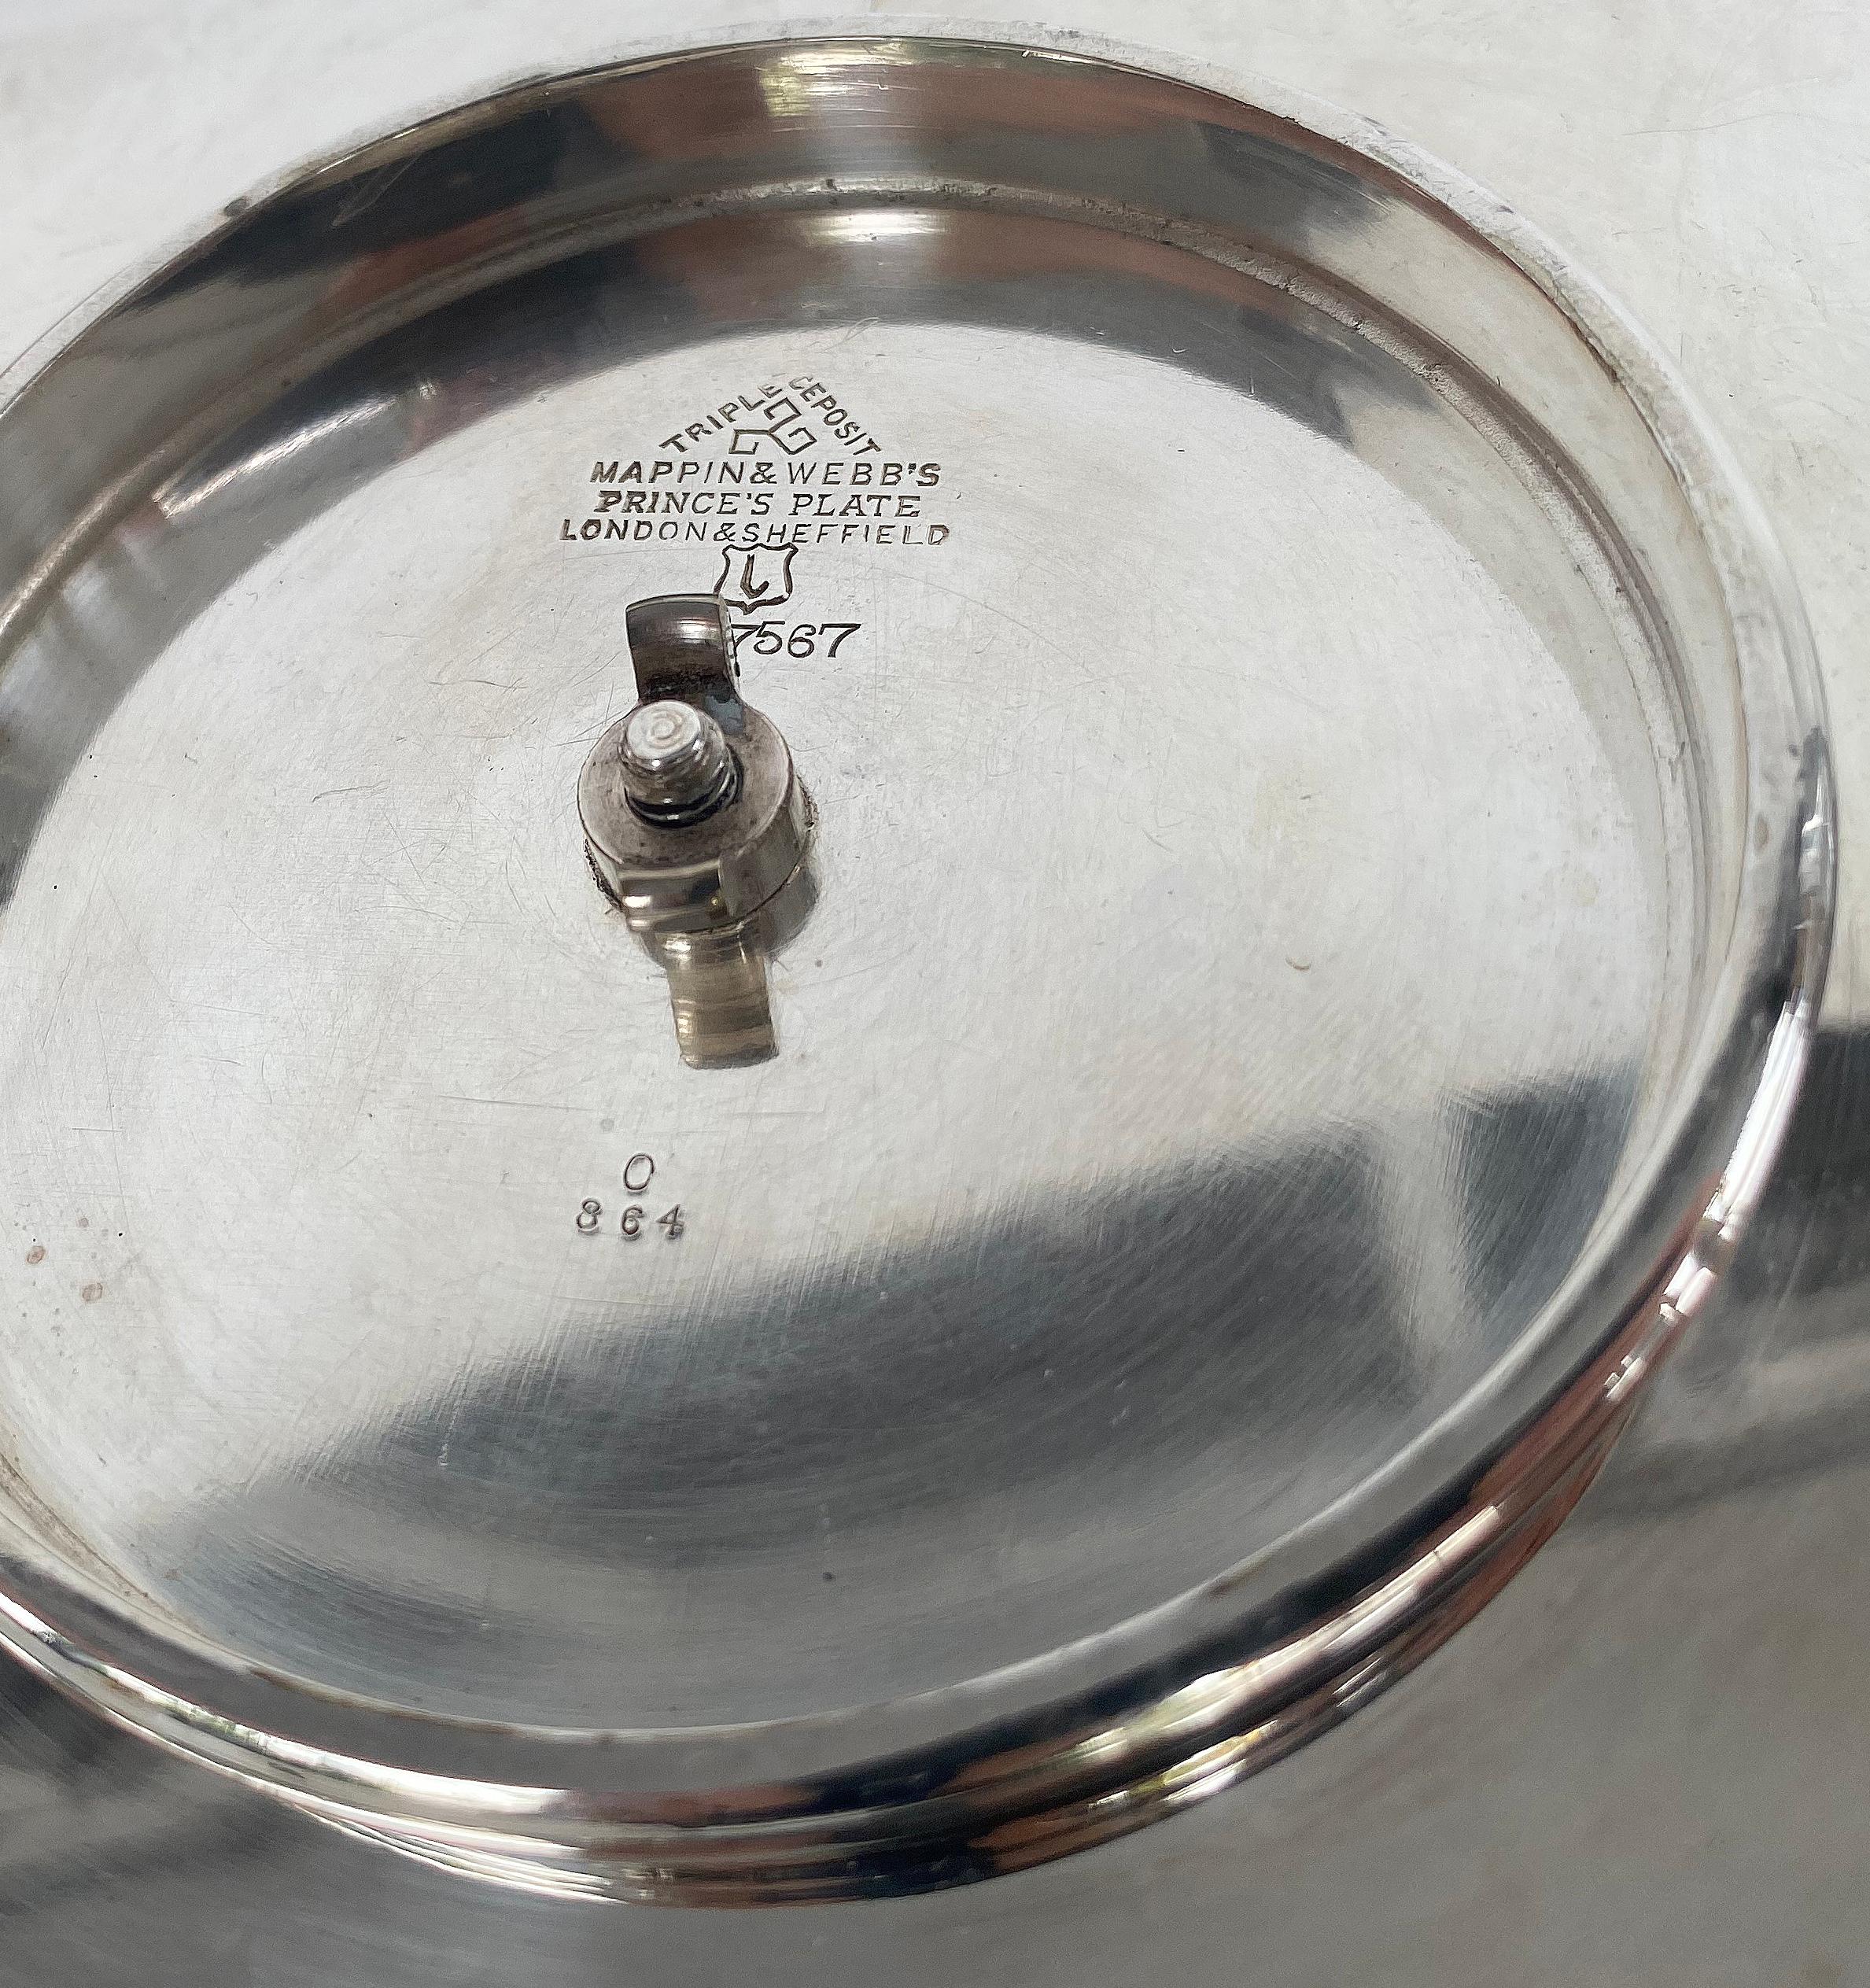 Silver Plate English Sheffield Mapping & Webb's Prince's Plate Silver Serving Piece